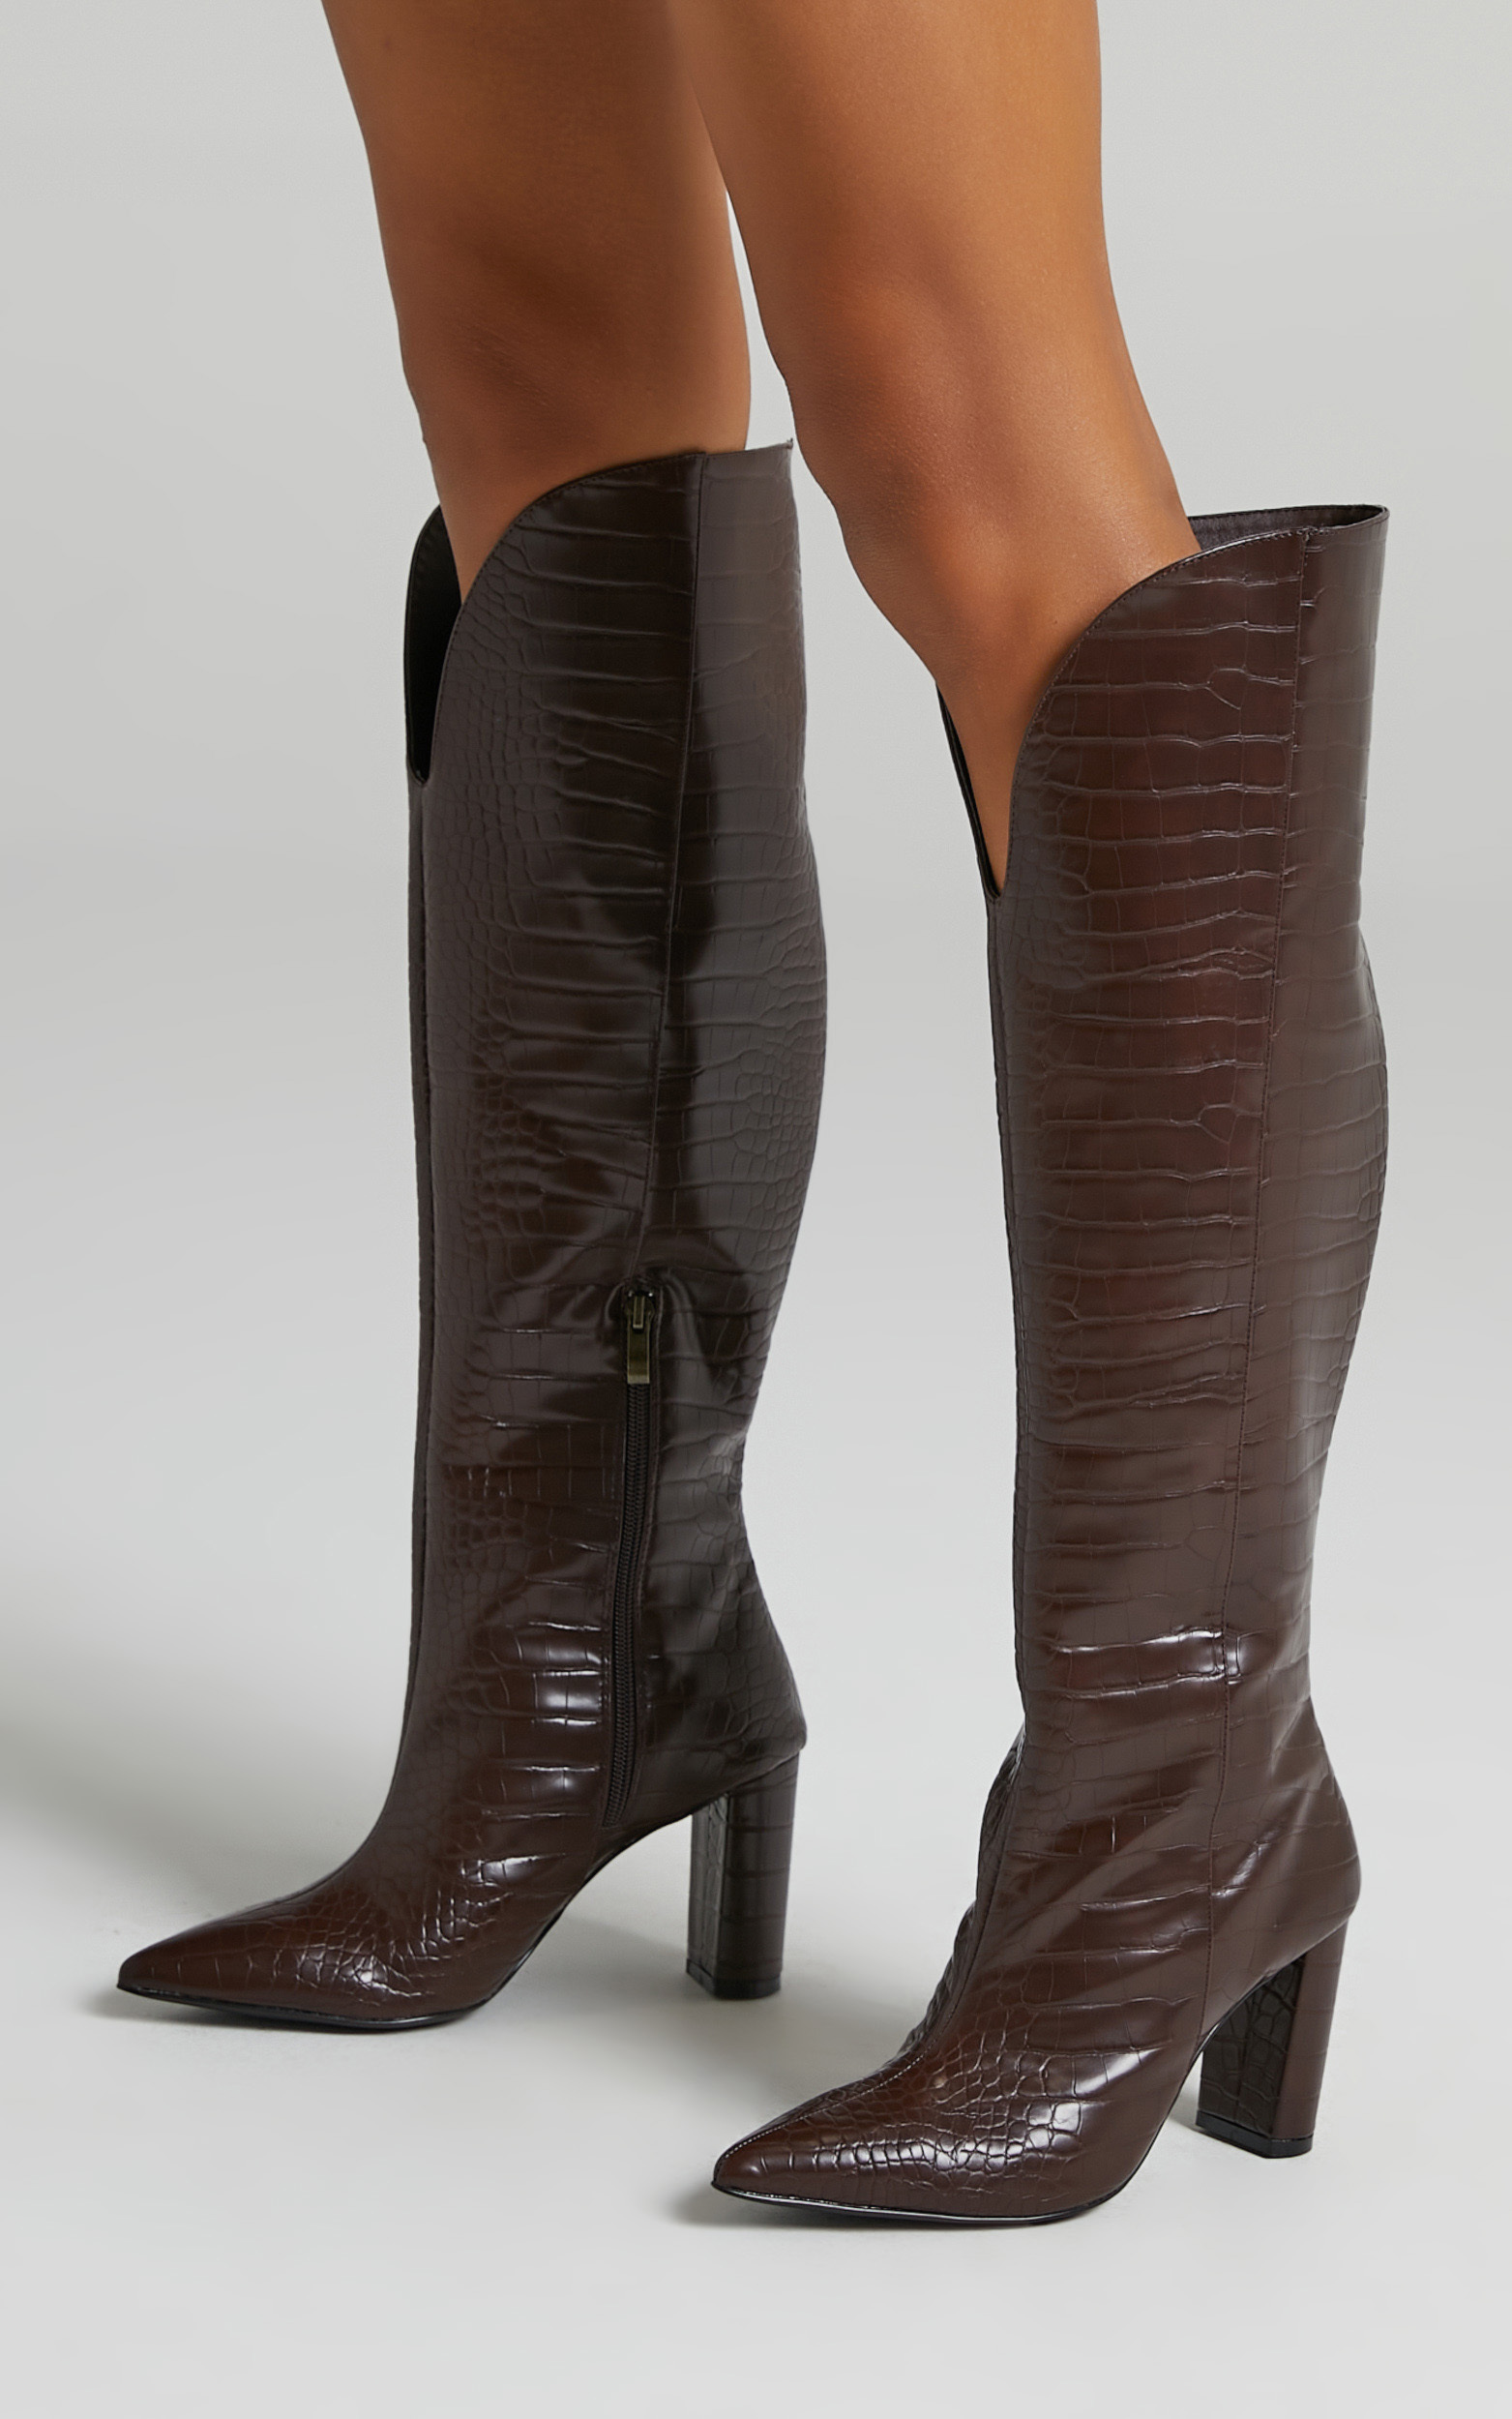 Therapy - Ginny Boots in Chocolate Croc - 05, BRN1, hi-res image number null